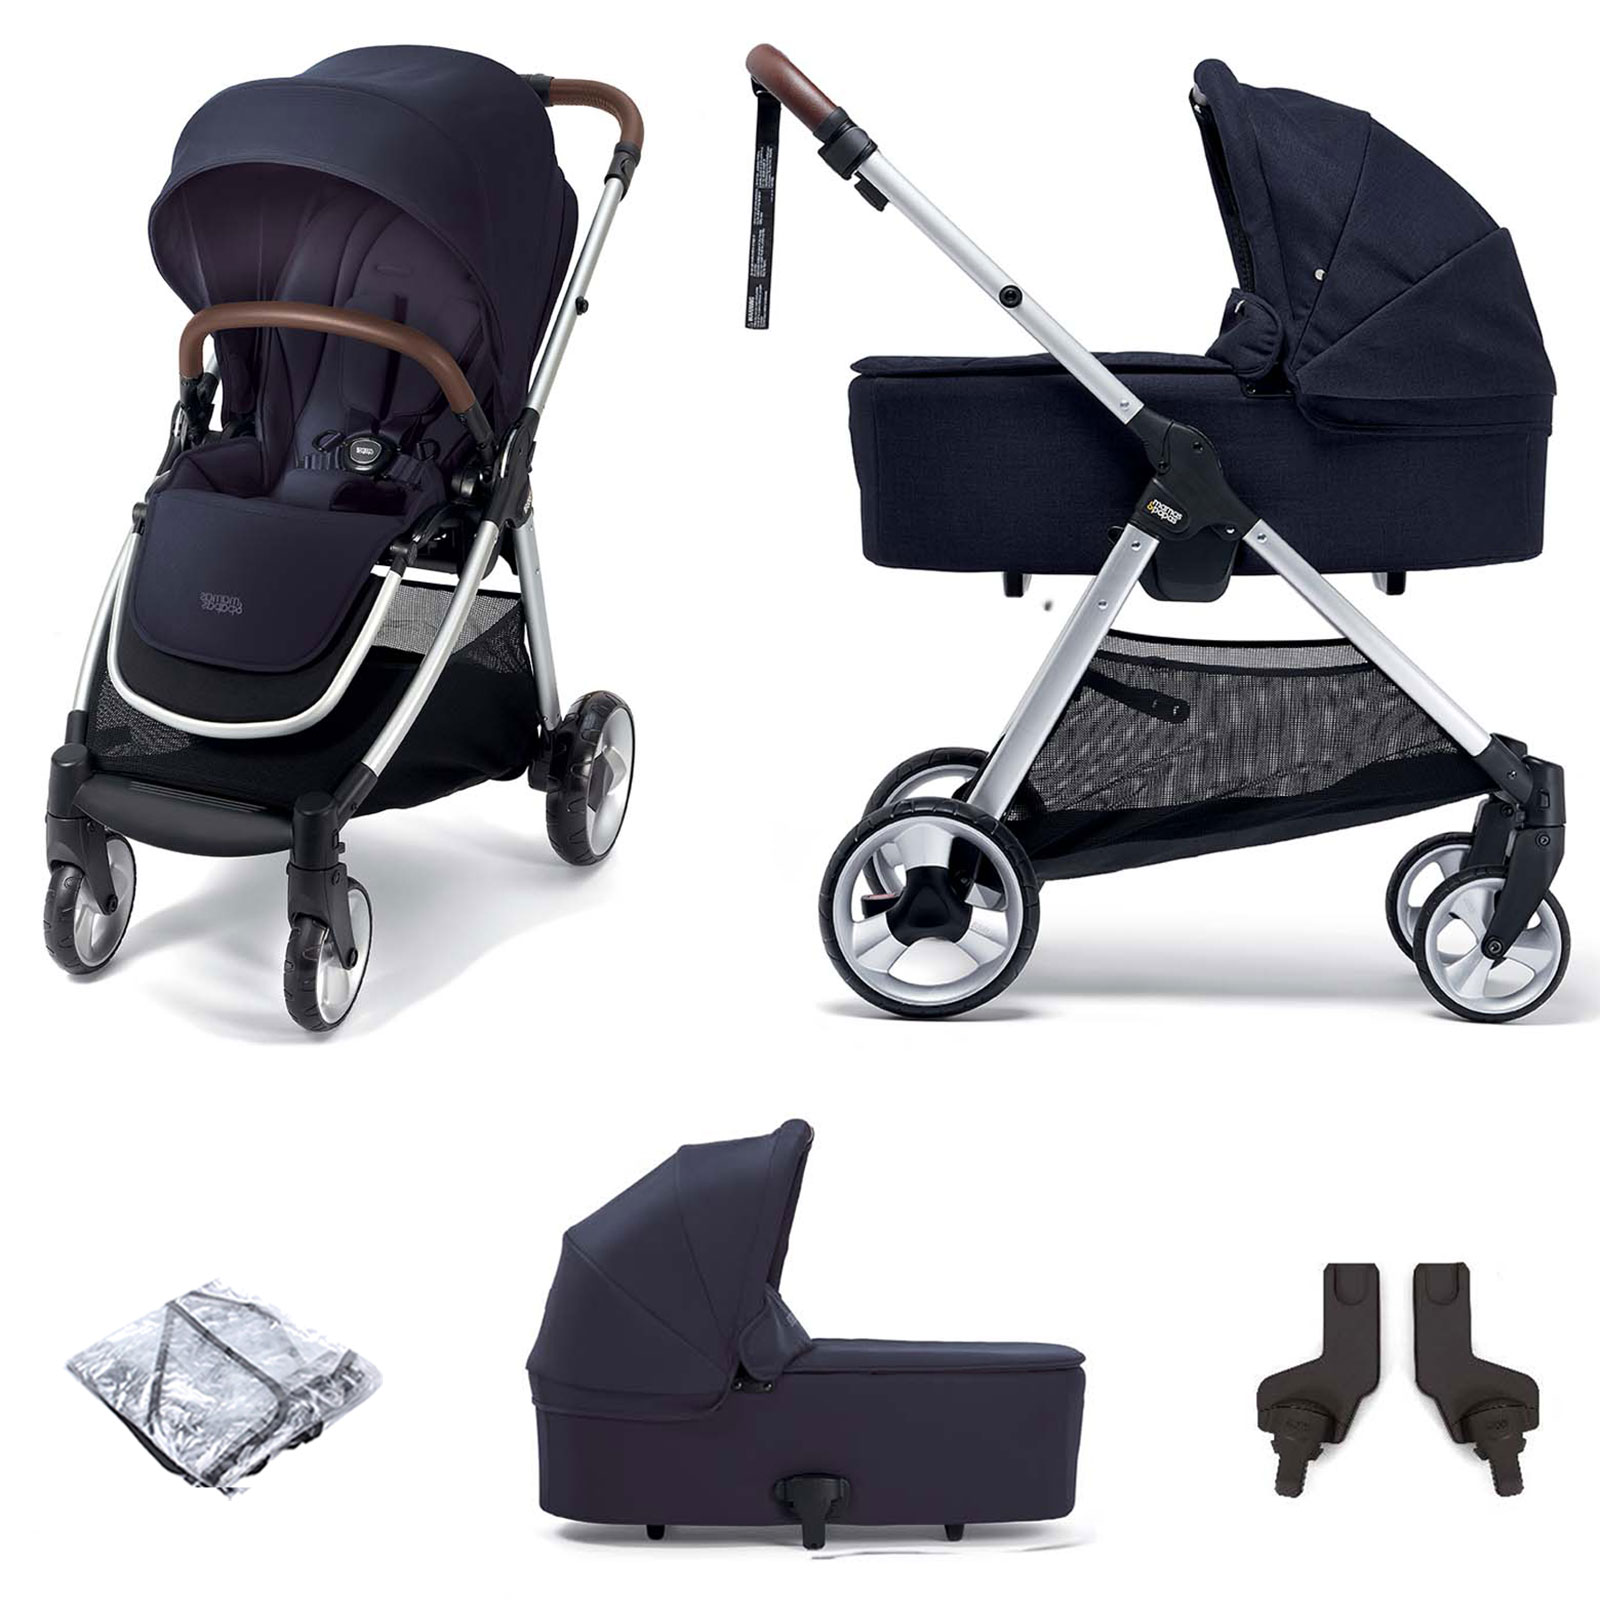 Mamas & Papas Flip XT2 2in1 Pushchair Stroller with Carrycot - Navy